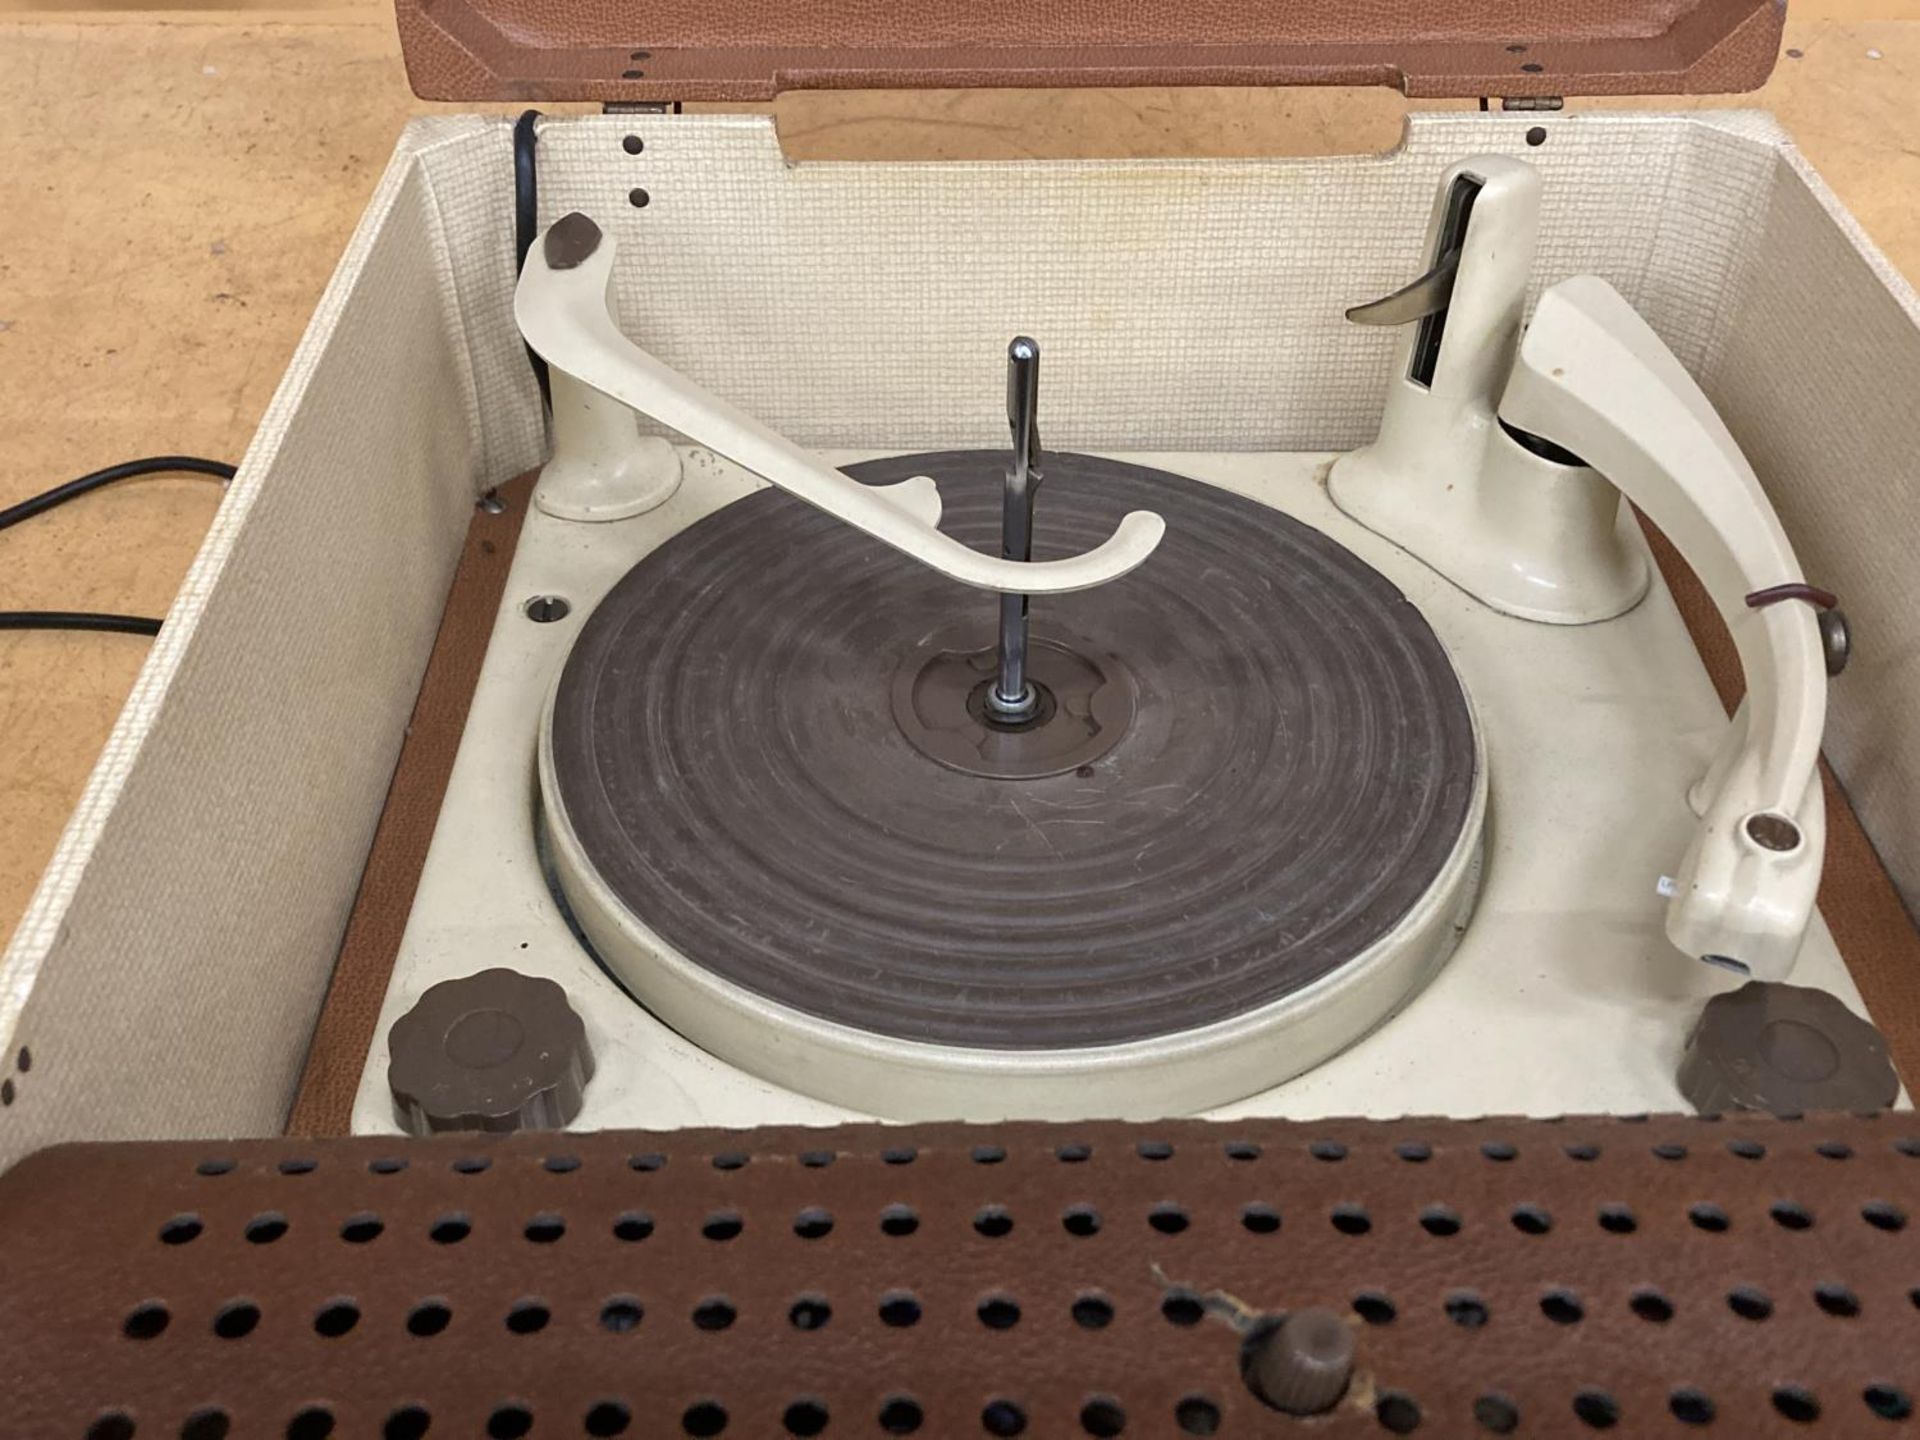 A KB RADIO TUNETIME VINTAGE RECORD PLAYER IN A CASE - Image 2 of 4